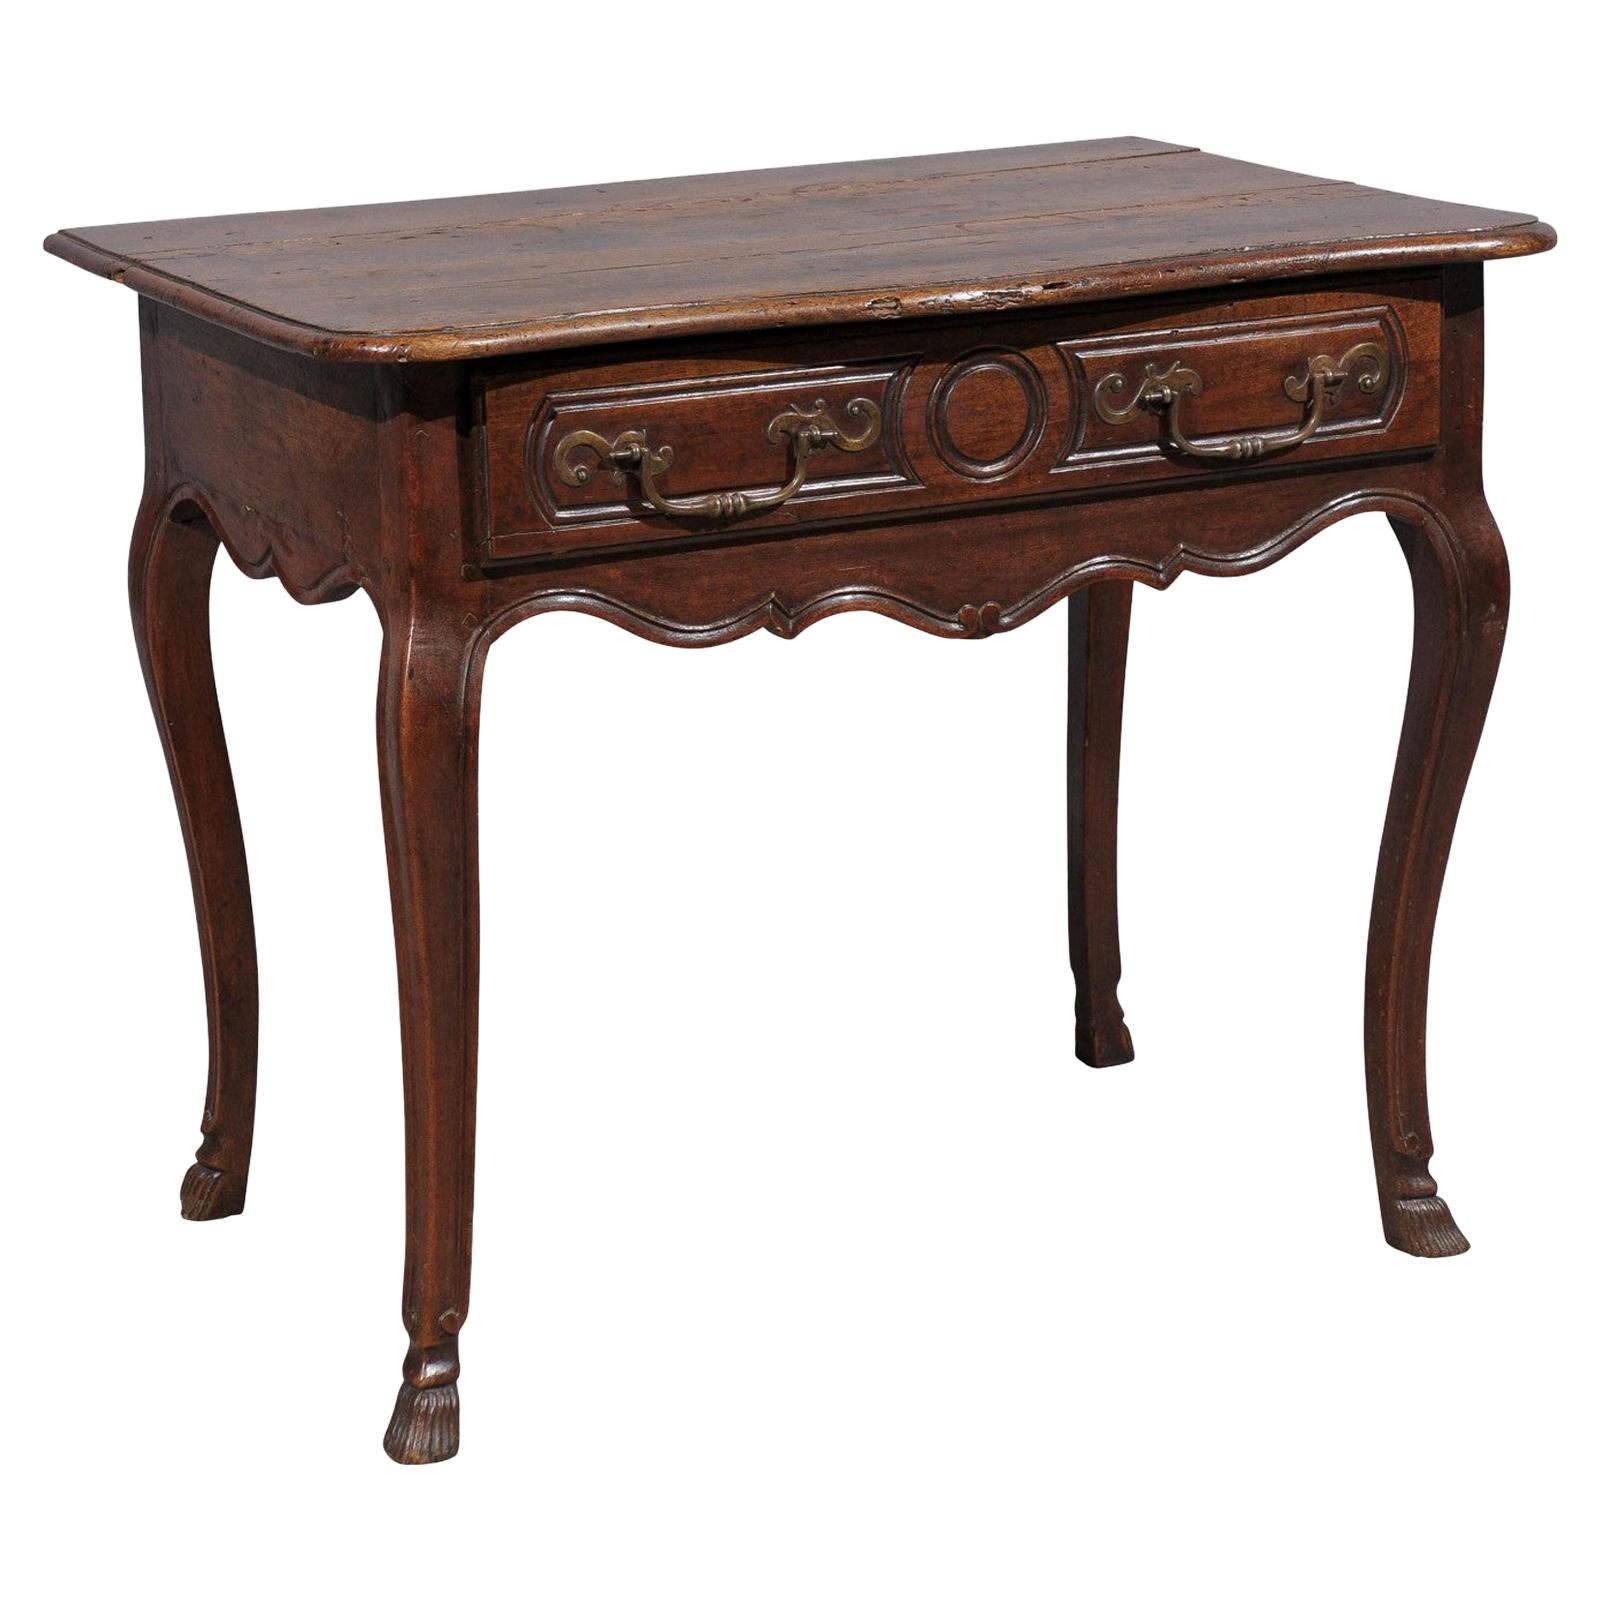 18th Century French Louis XV Walnut Table with Drawer and Hoof Feet